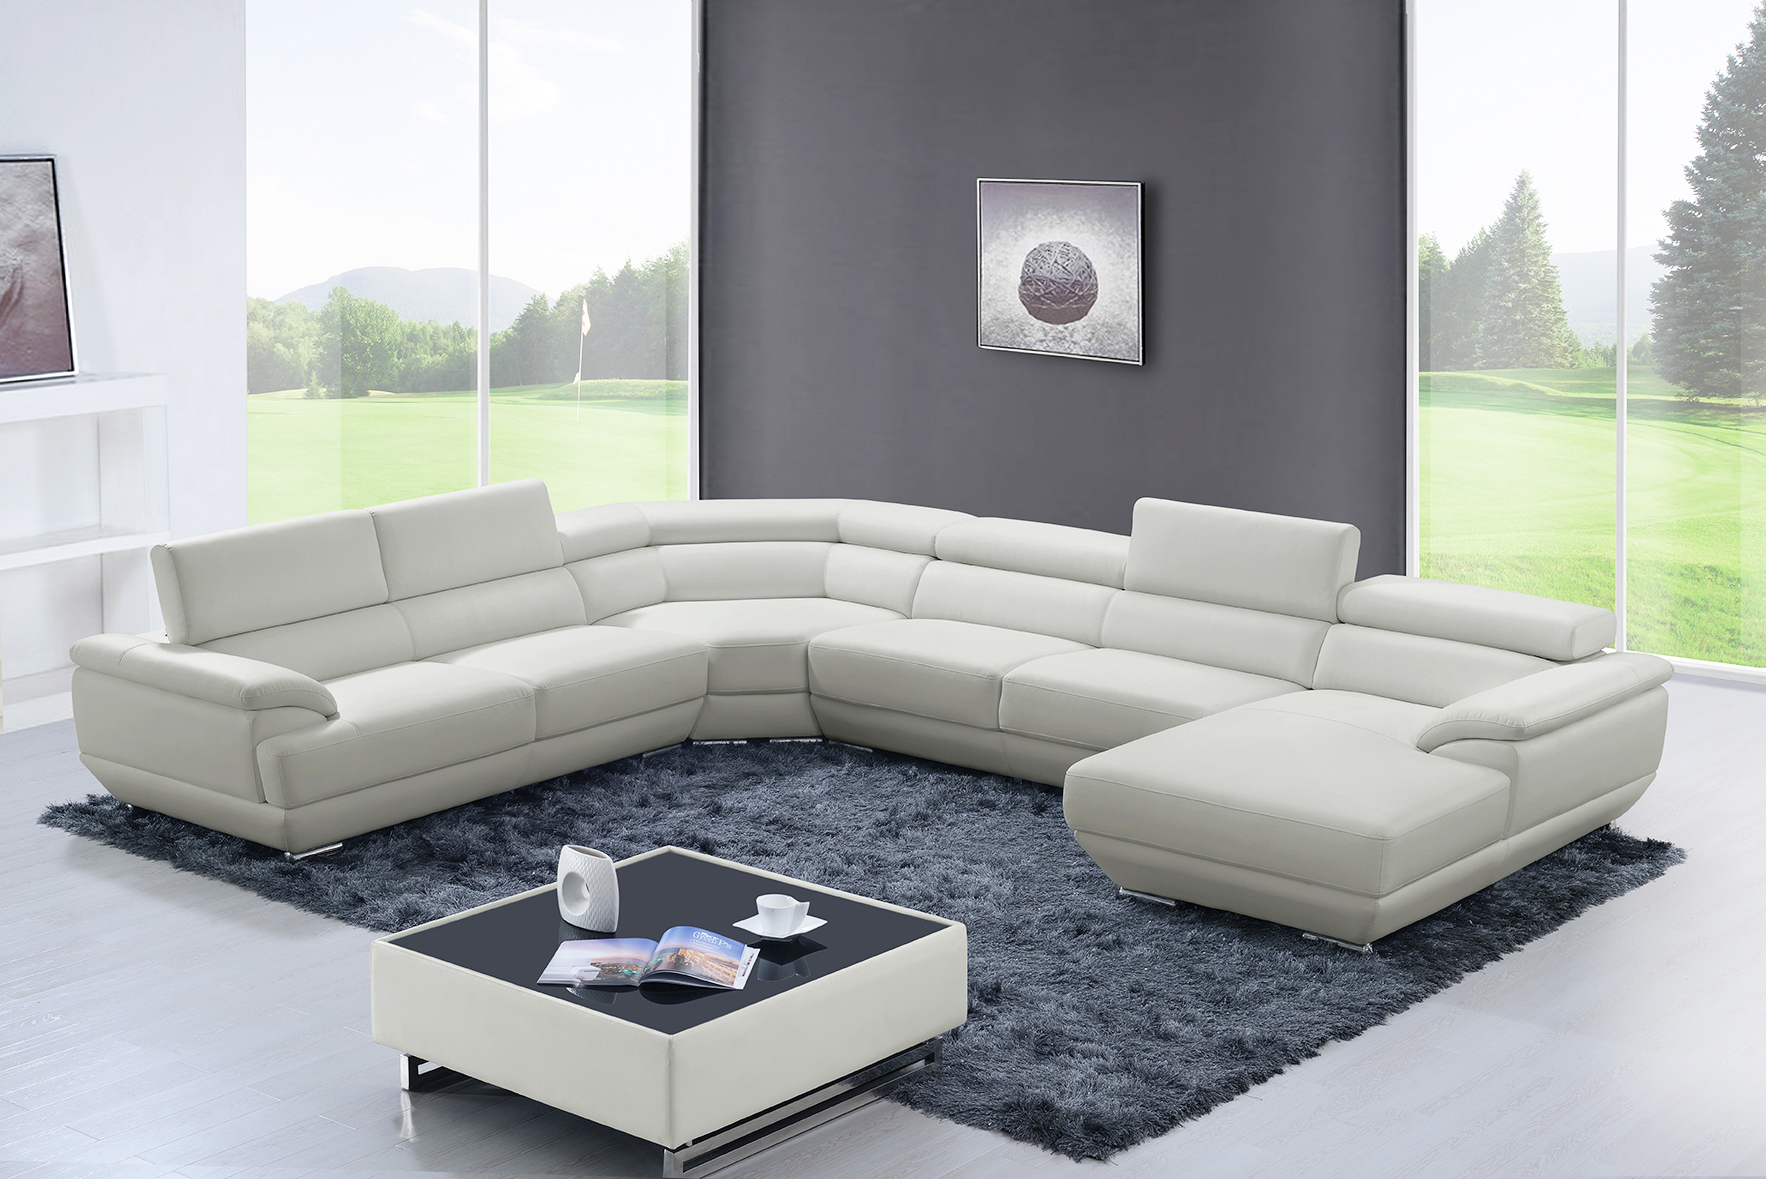 430 Sectional Off White, Sectionals, Living Room Furniture